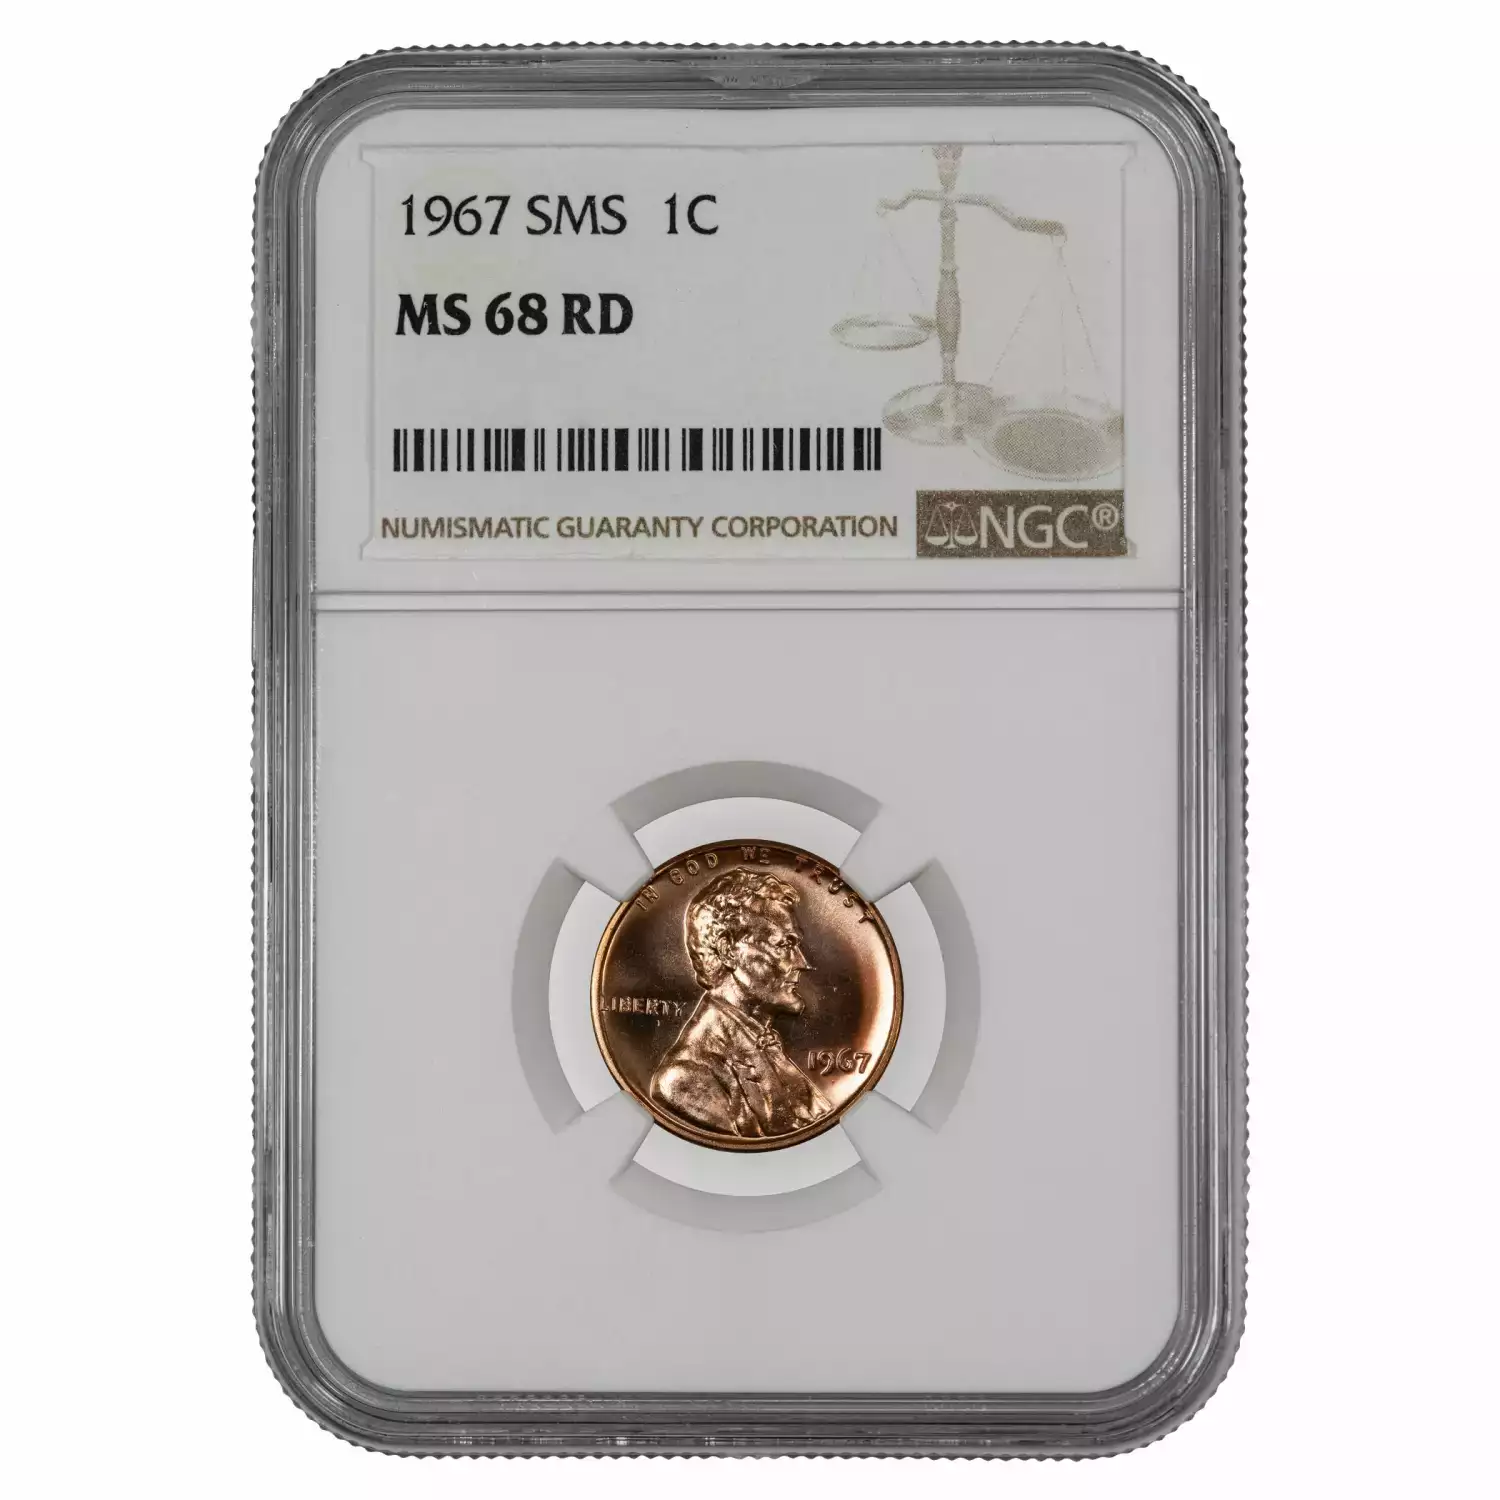 1967 SMS LINCOLN MEMORIAL CENT PENNY 1C NGC CERTIFIED MS 68 RD